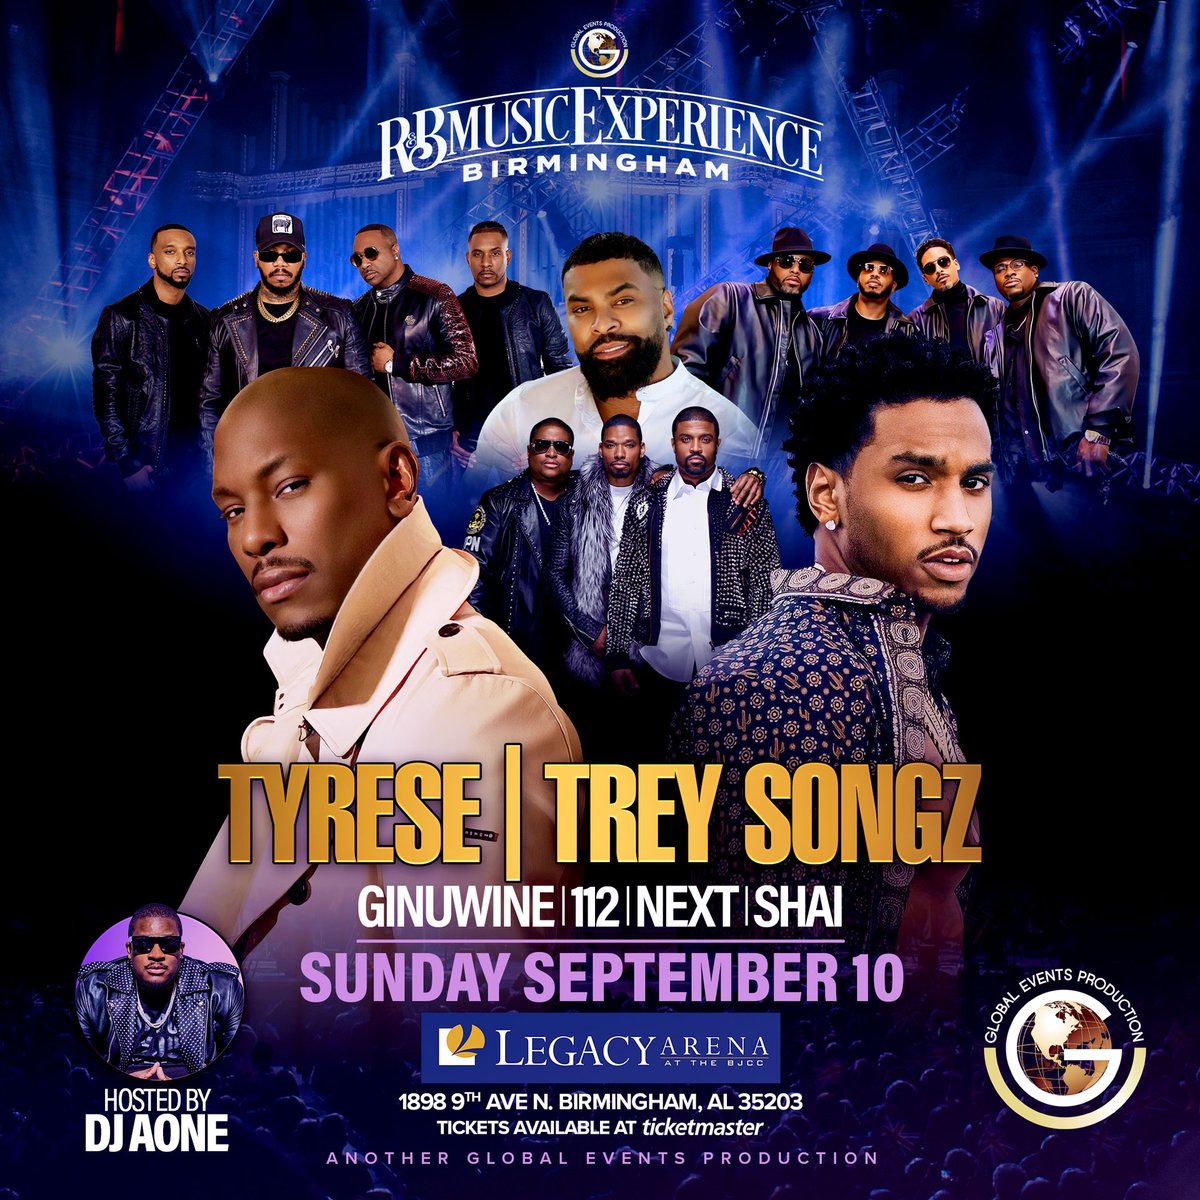 Birmingham R&B Music Experience feat Tyrese, Trey Songz, Ginuwine @ The Legacy Arena 9.10.2023 - https://t.co/aevRcHp9cA https://t.co/ML54kW2yaV